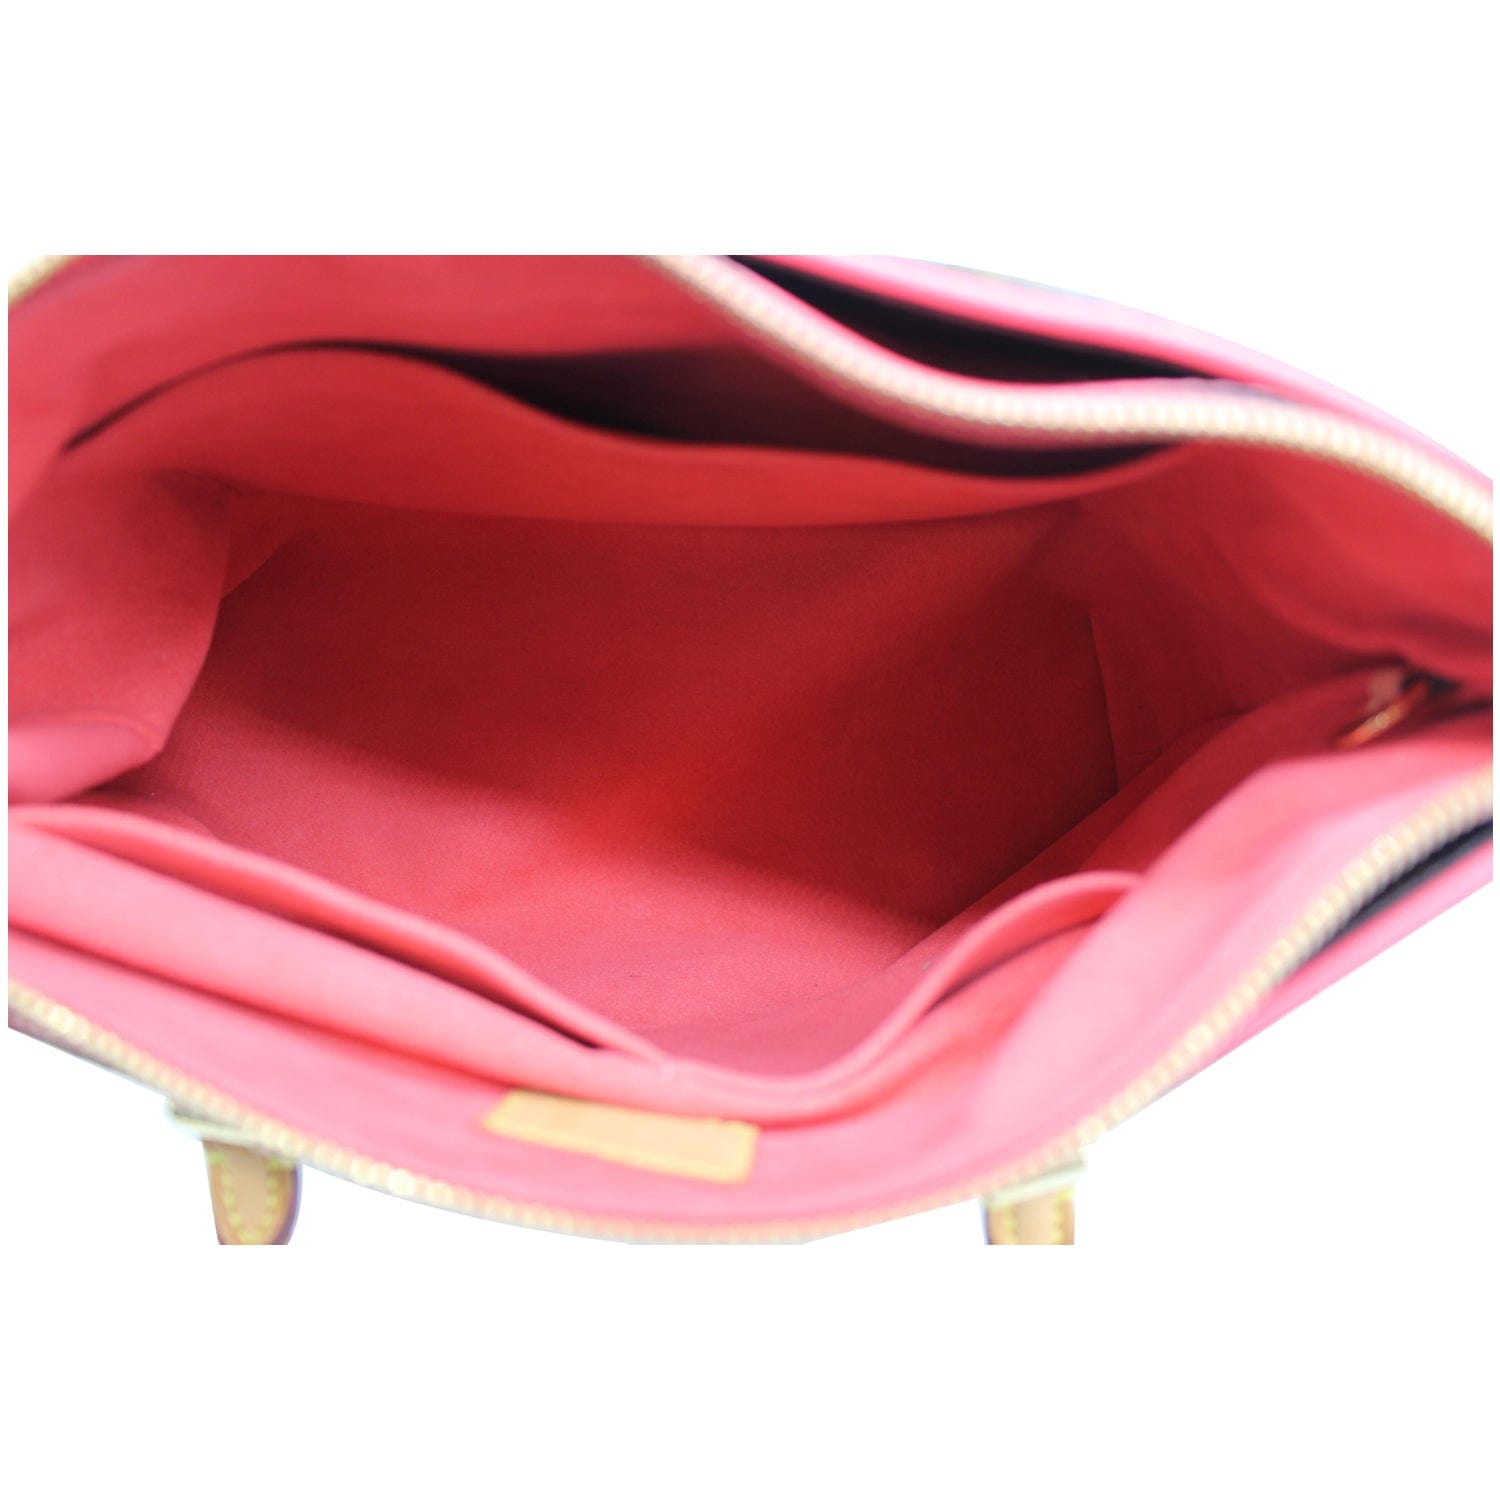 Louis Vuitton Monogram Pallas MM with Hot Pink - A World Of Goods